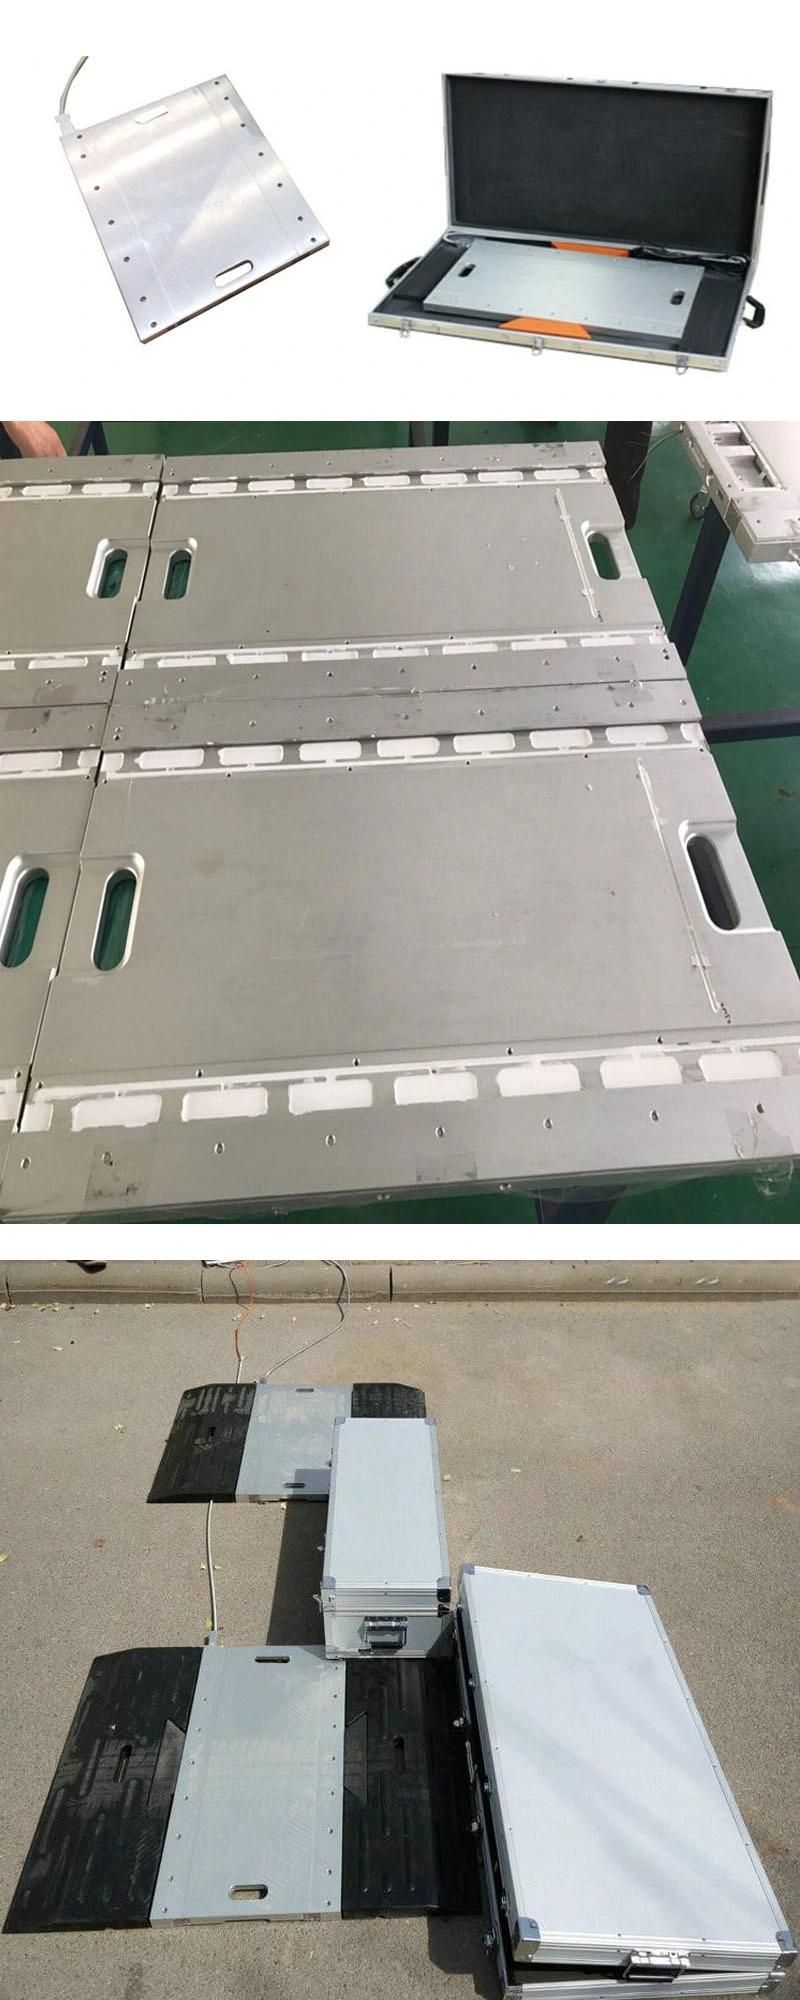 Portable Axle Weighing Pad Scale